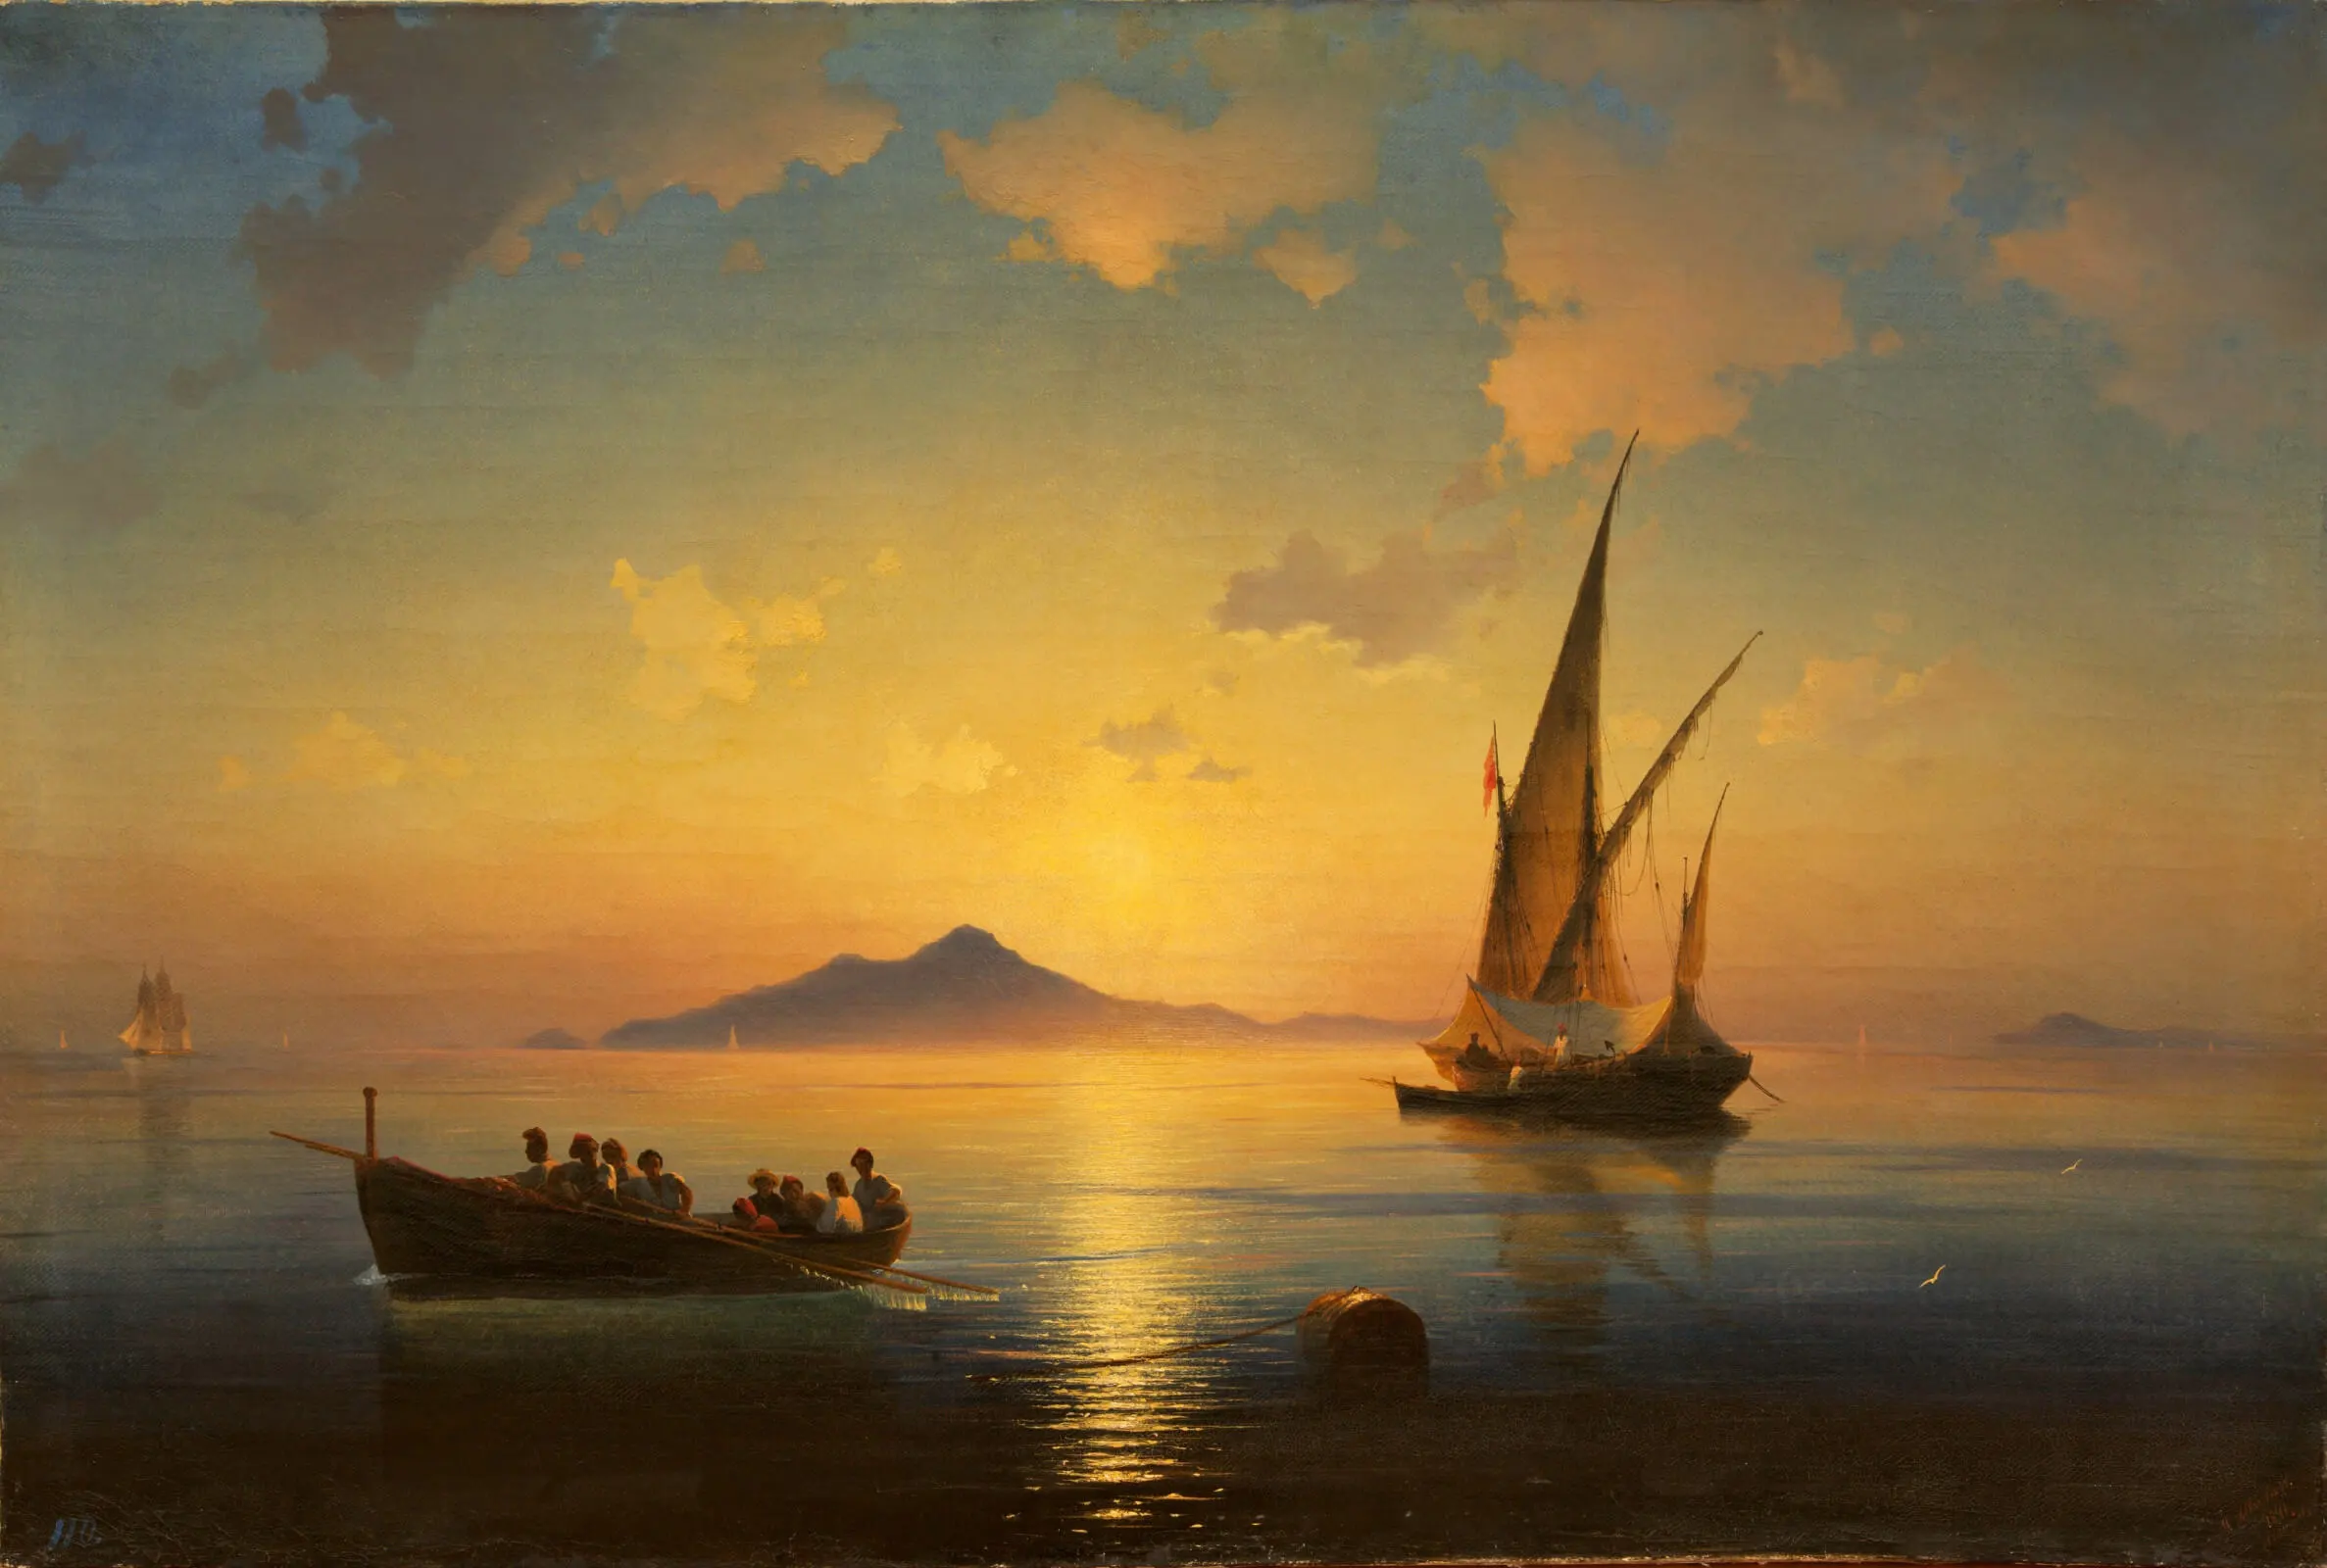 Painting "The Bay Of Naples" by Ivan Konstantinovich Aivazovsky